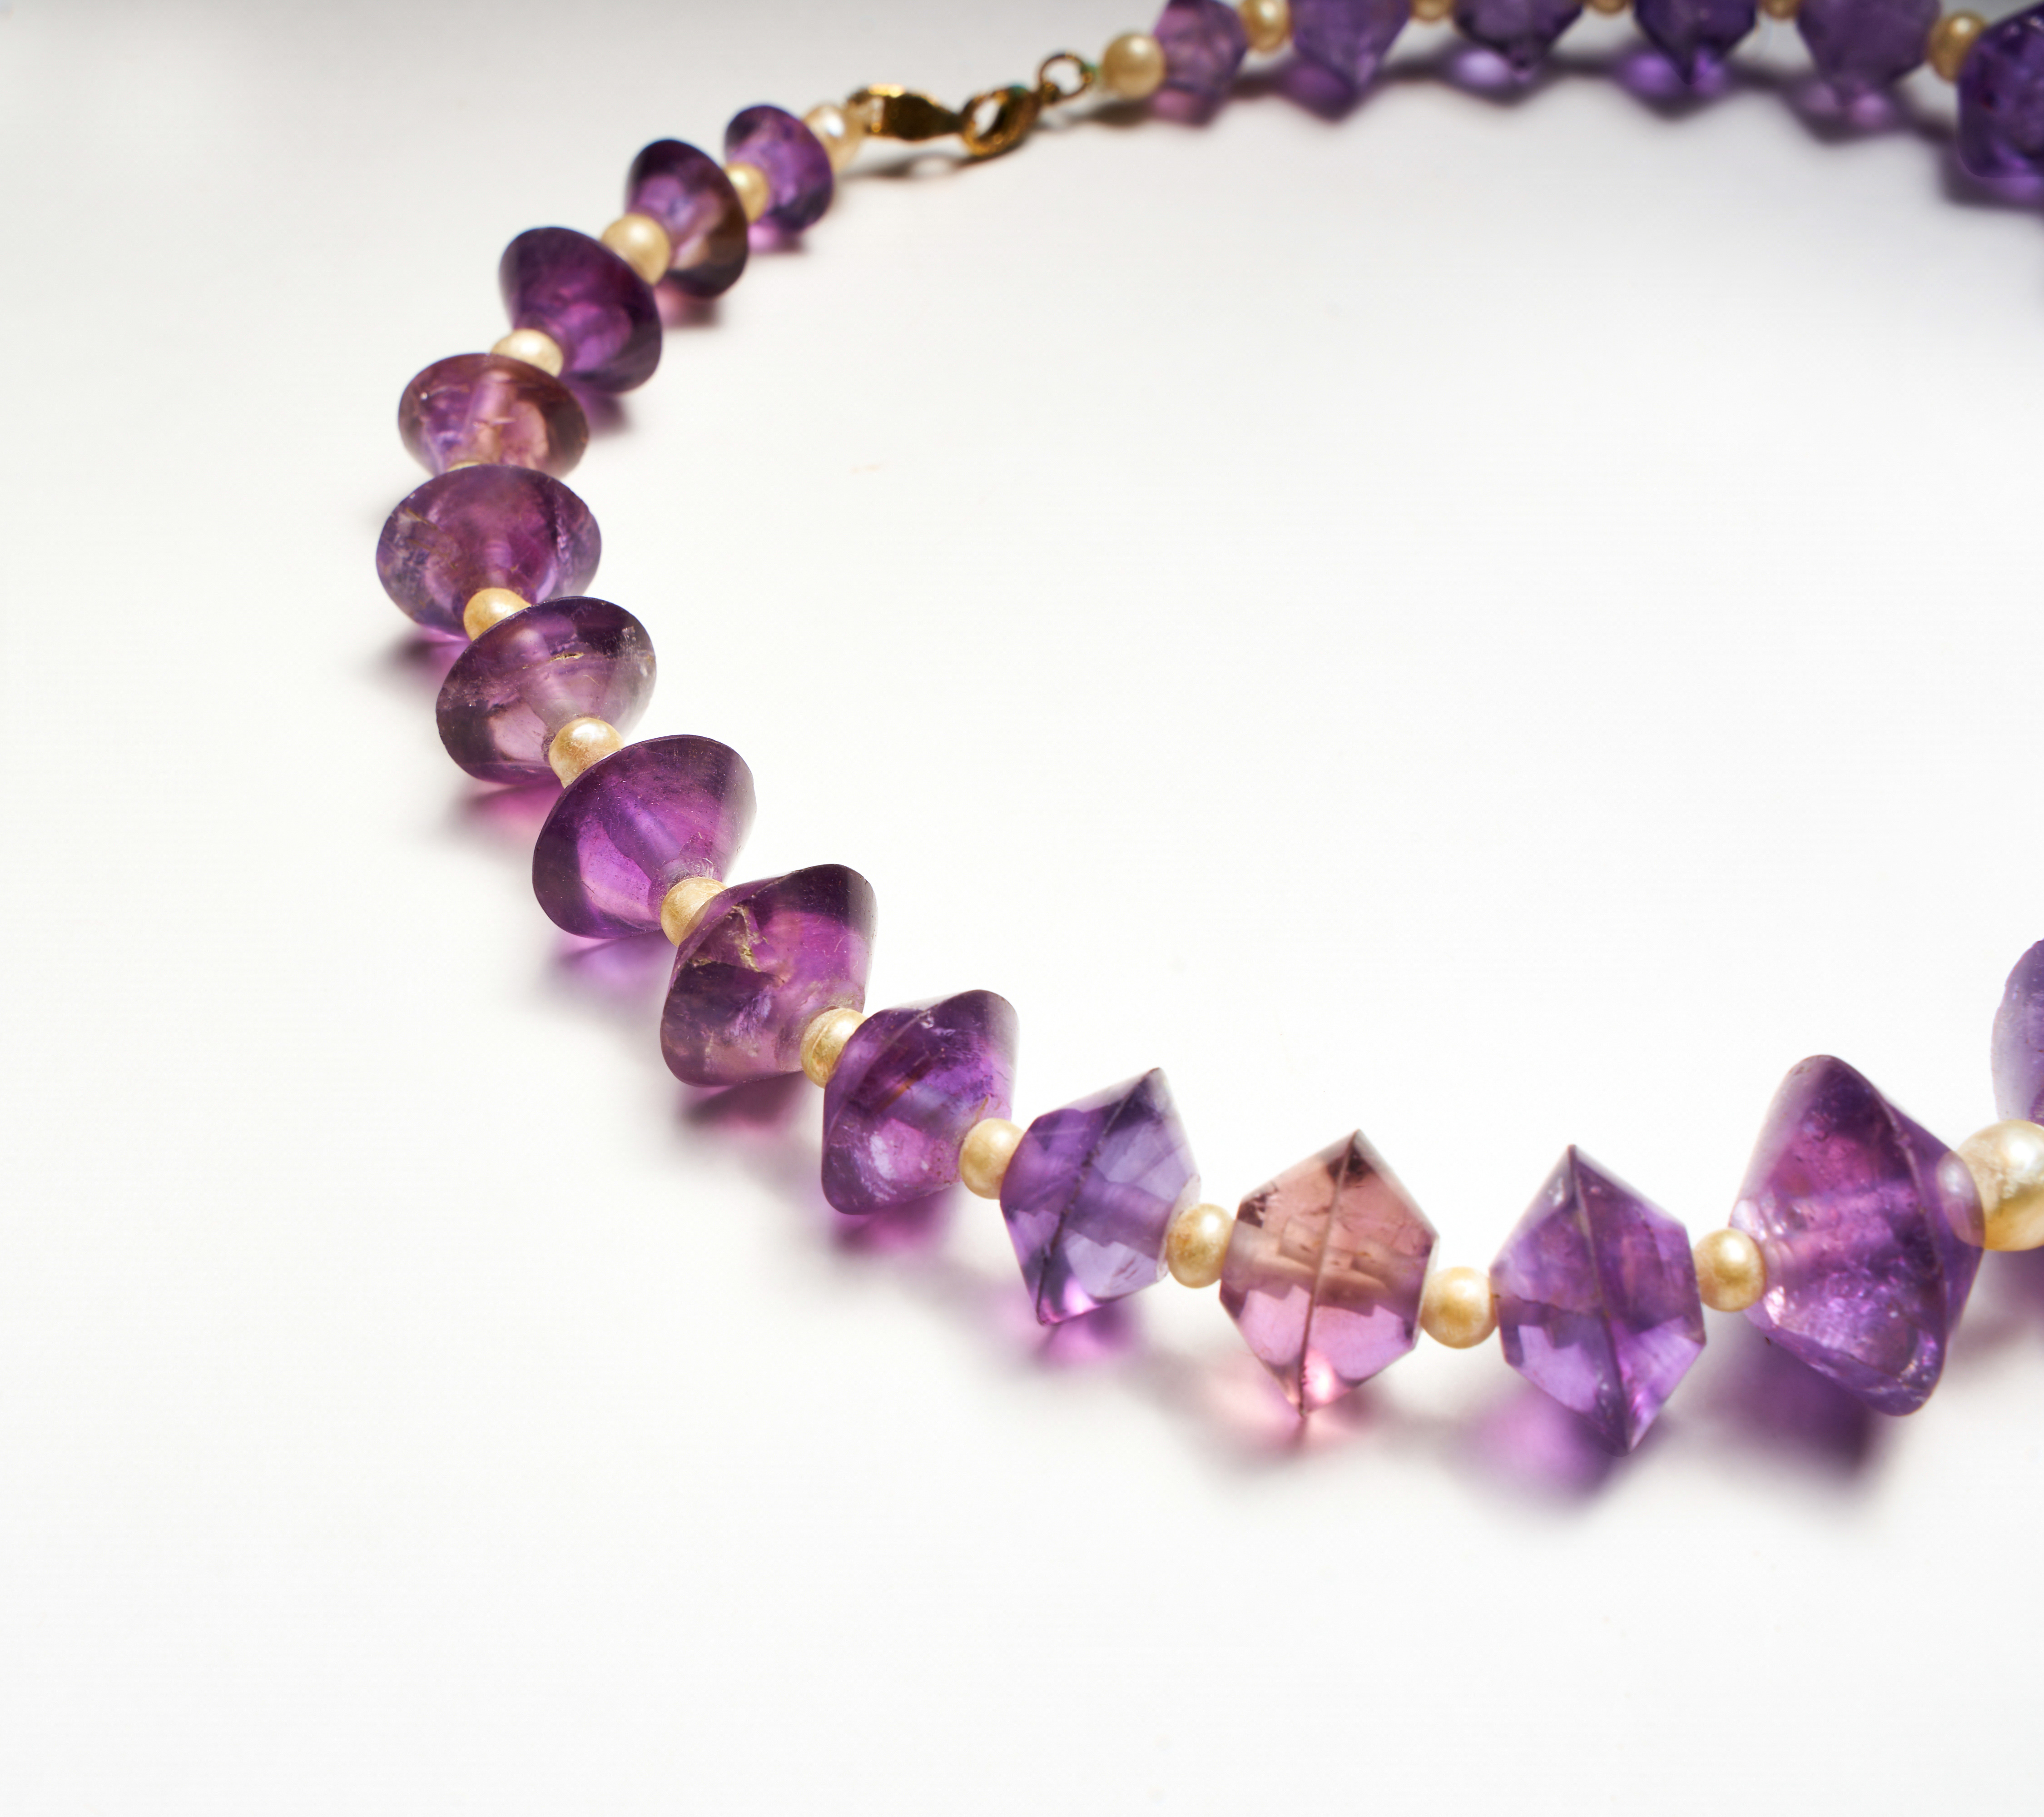 A ROMAN GOLD, AMETHYST & PEARL BEAD NECKLACE CIRCA 1ST CENTURY B.C.-1ST CENTURY A.D. - Image 3 of 5